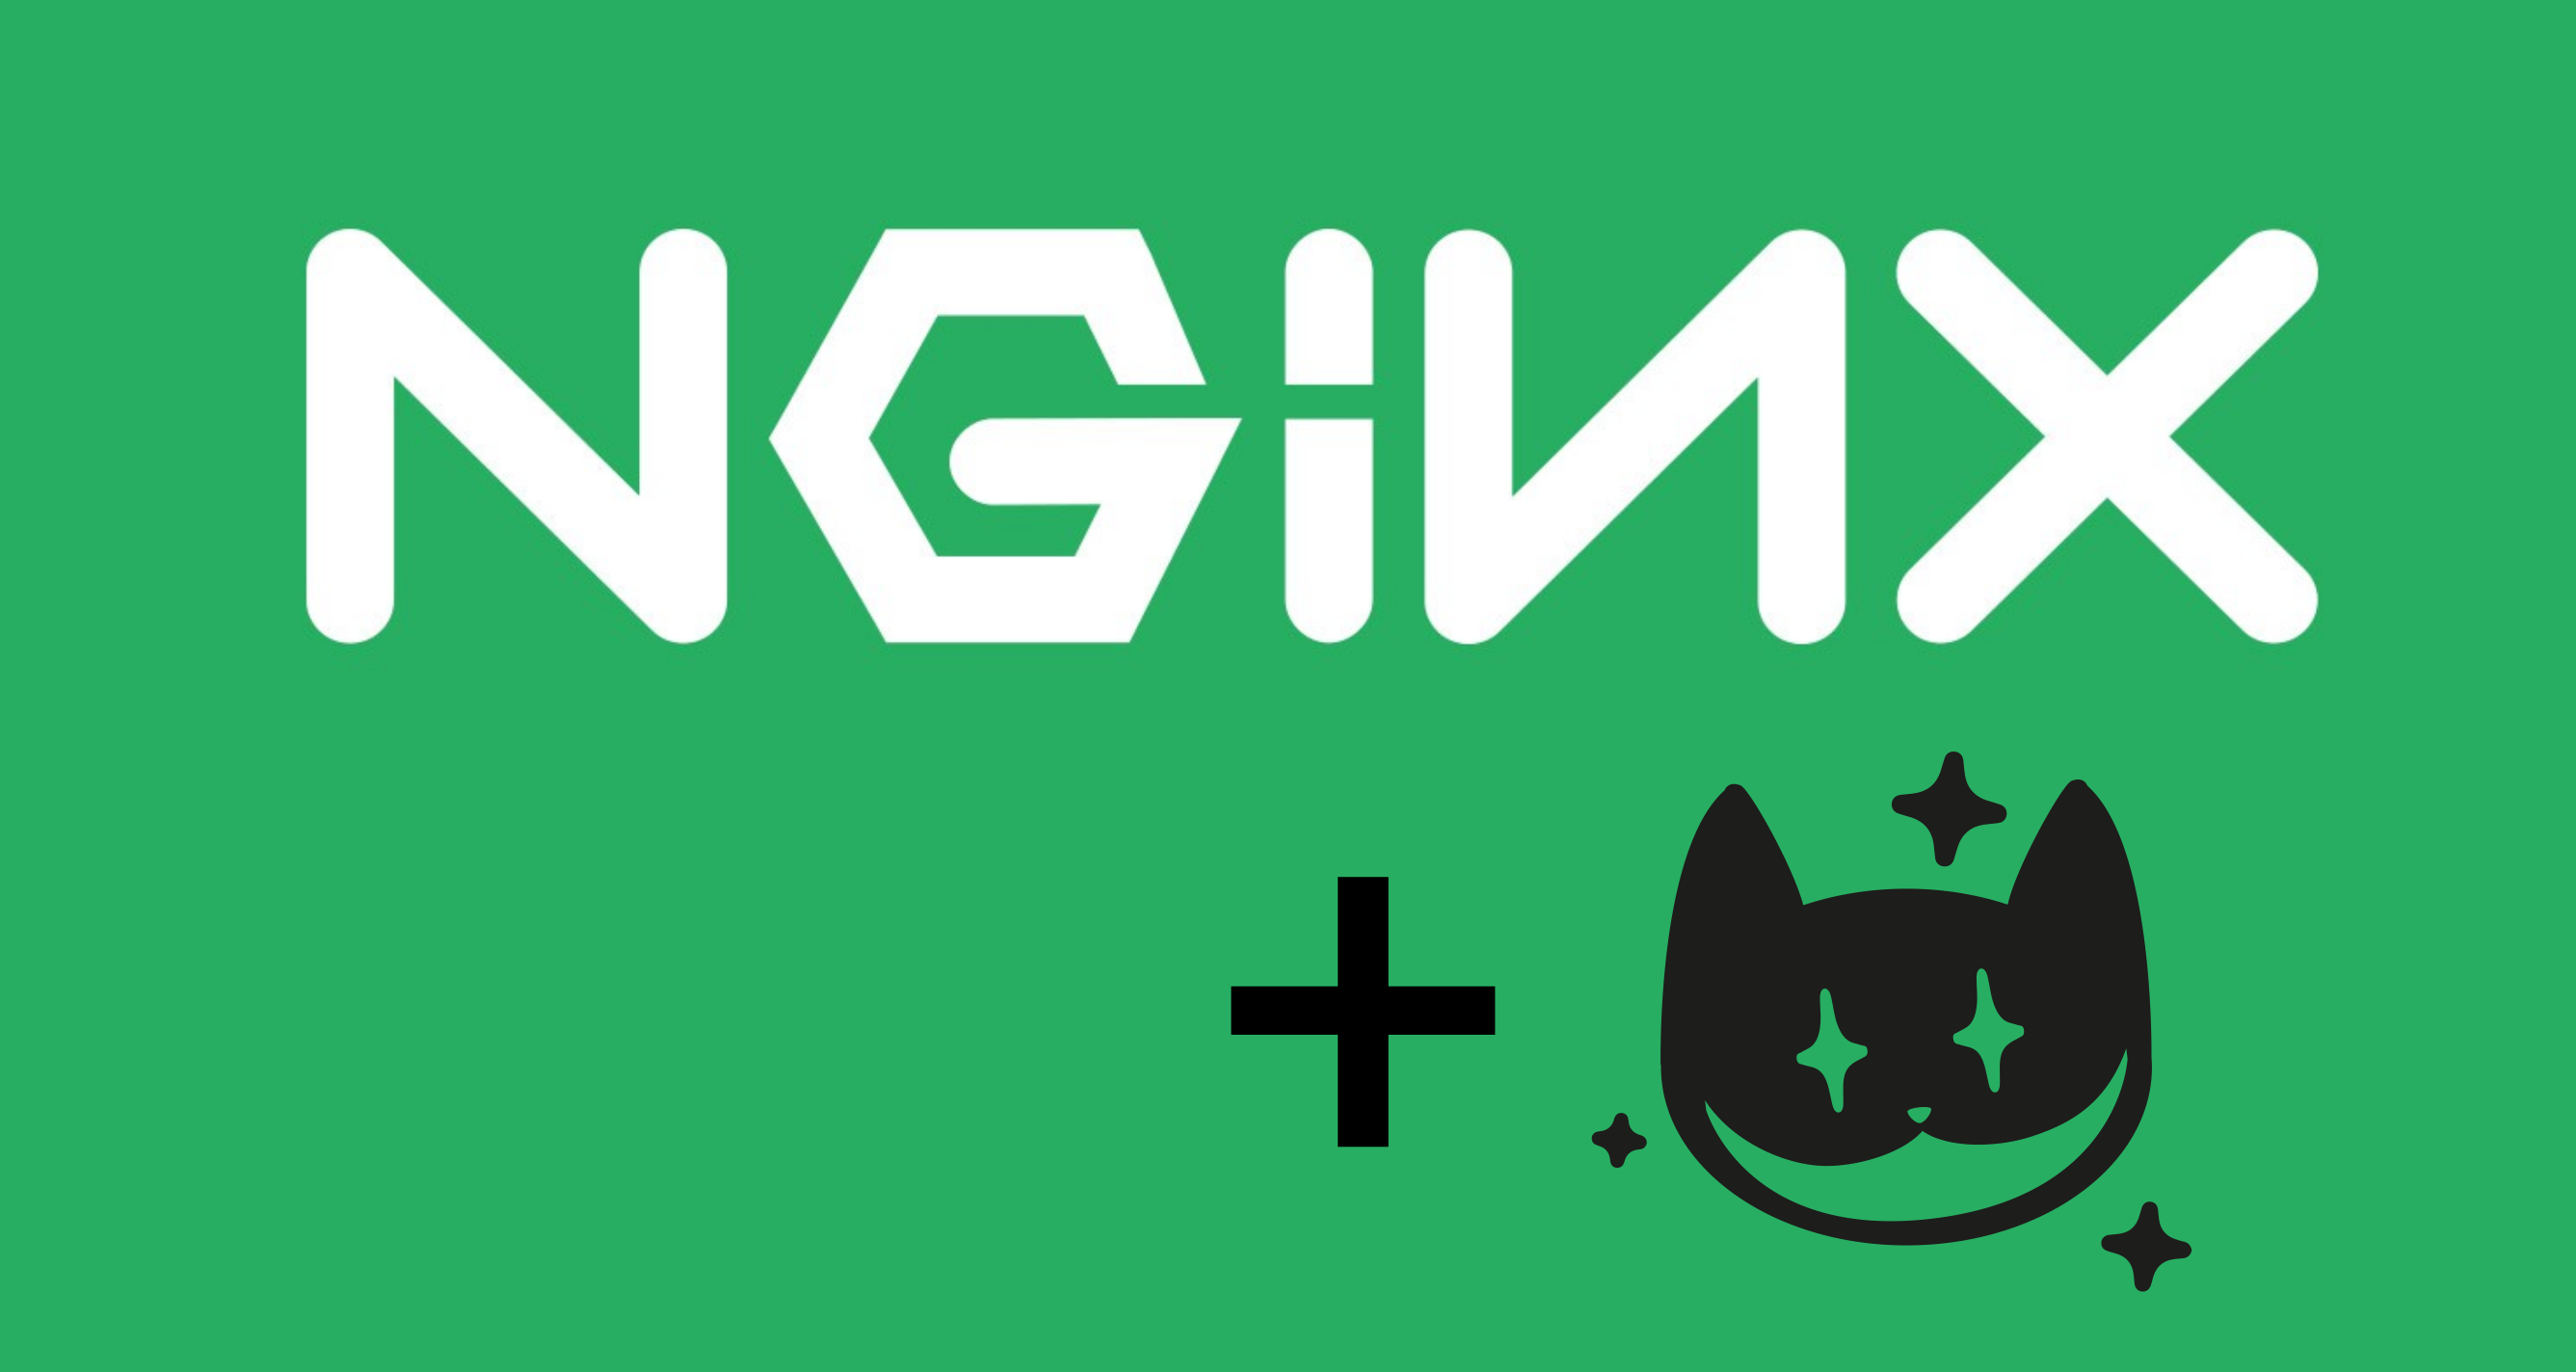 How to use Cheshire Cat behind NGINX